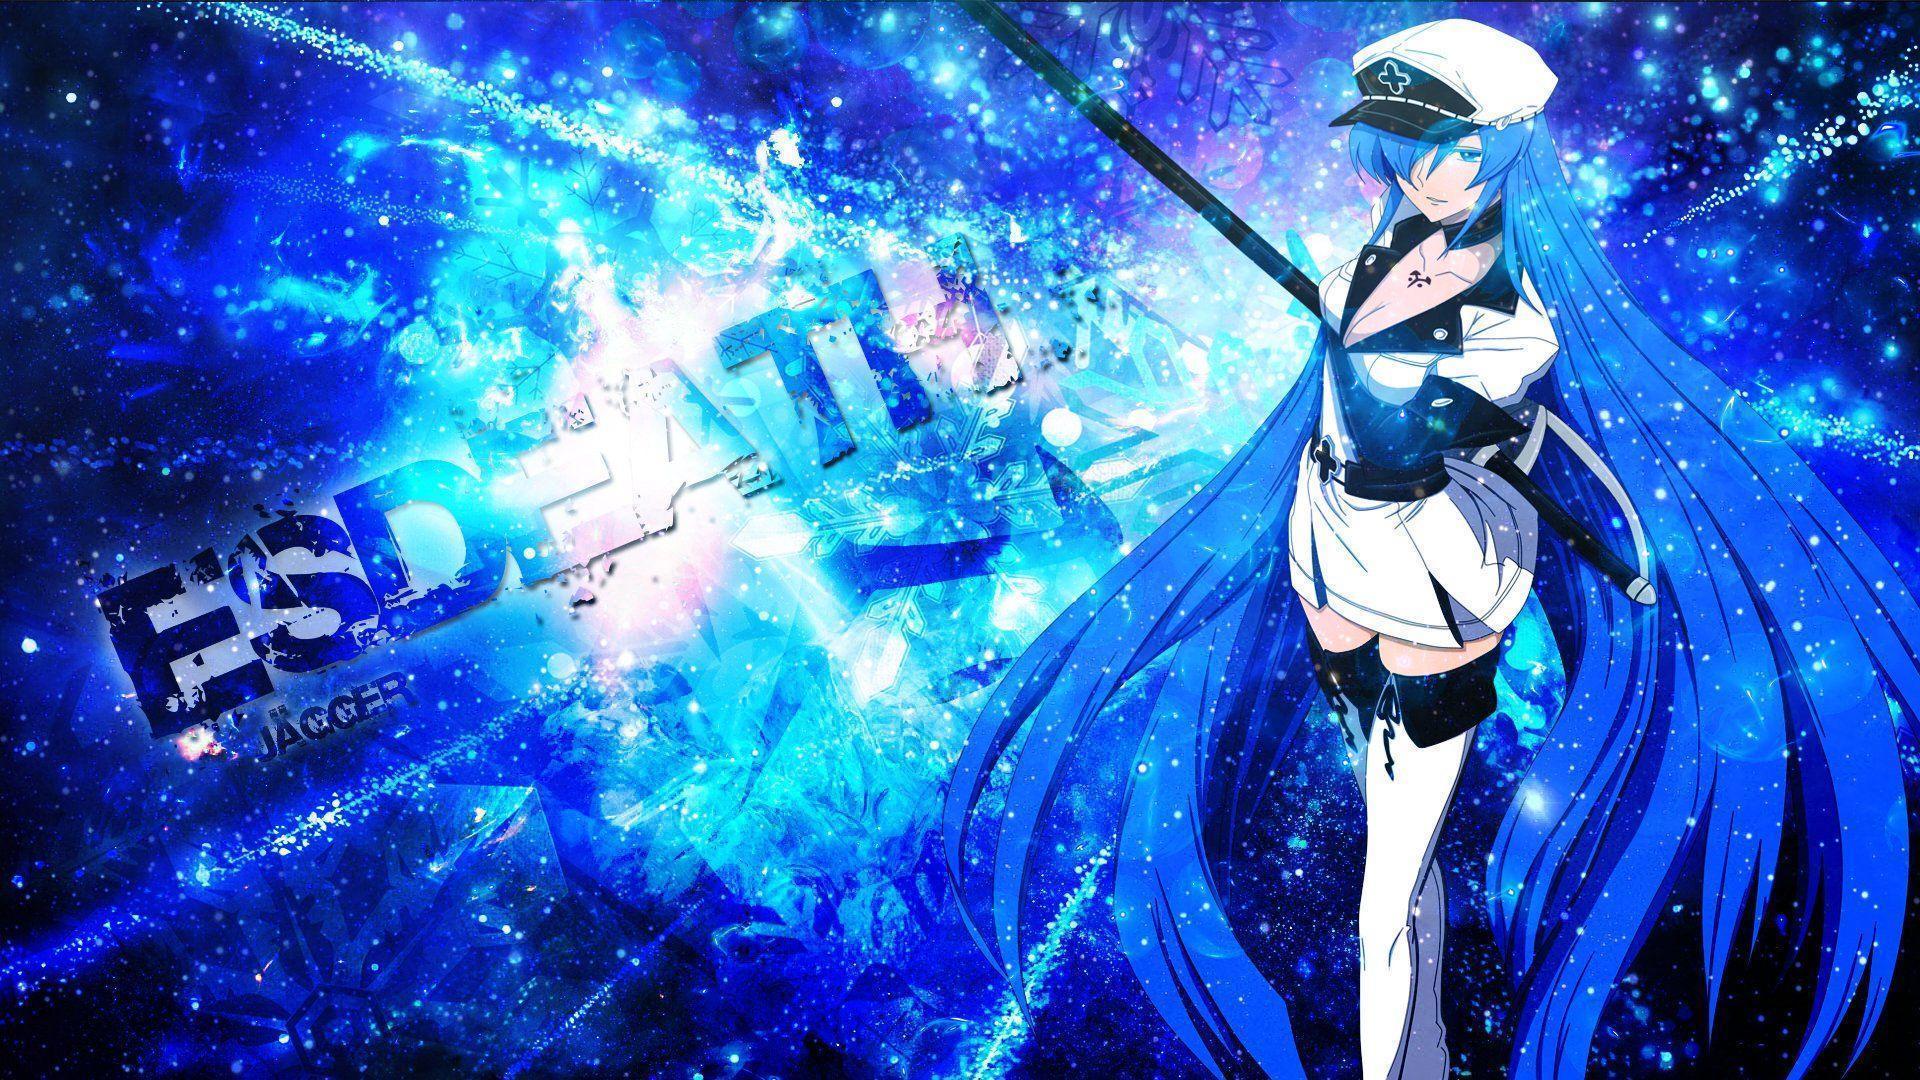 Esdeath Wallpapers 80 pictures